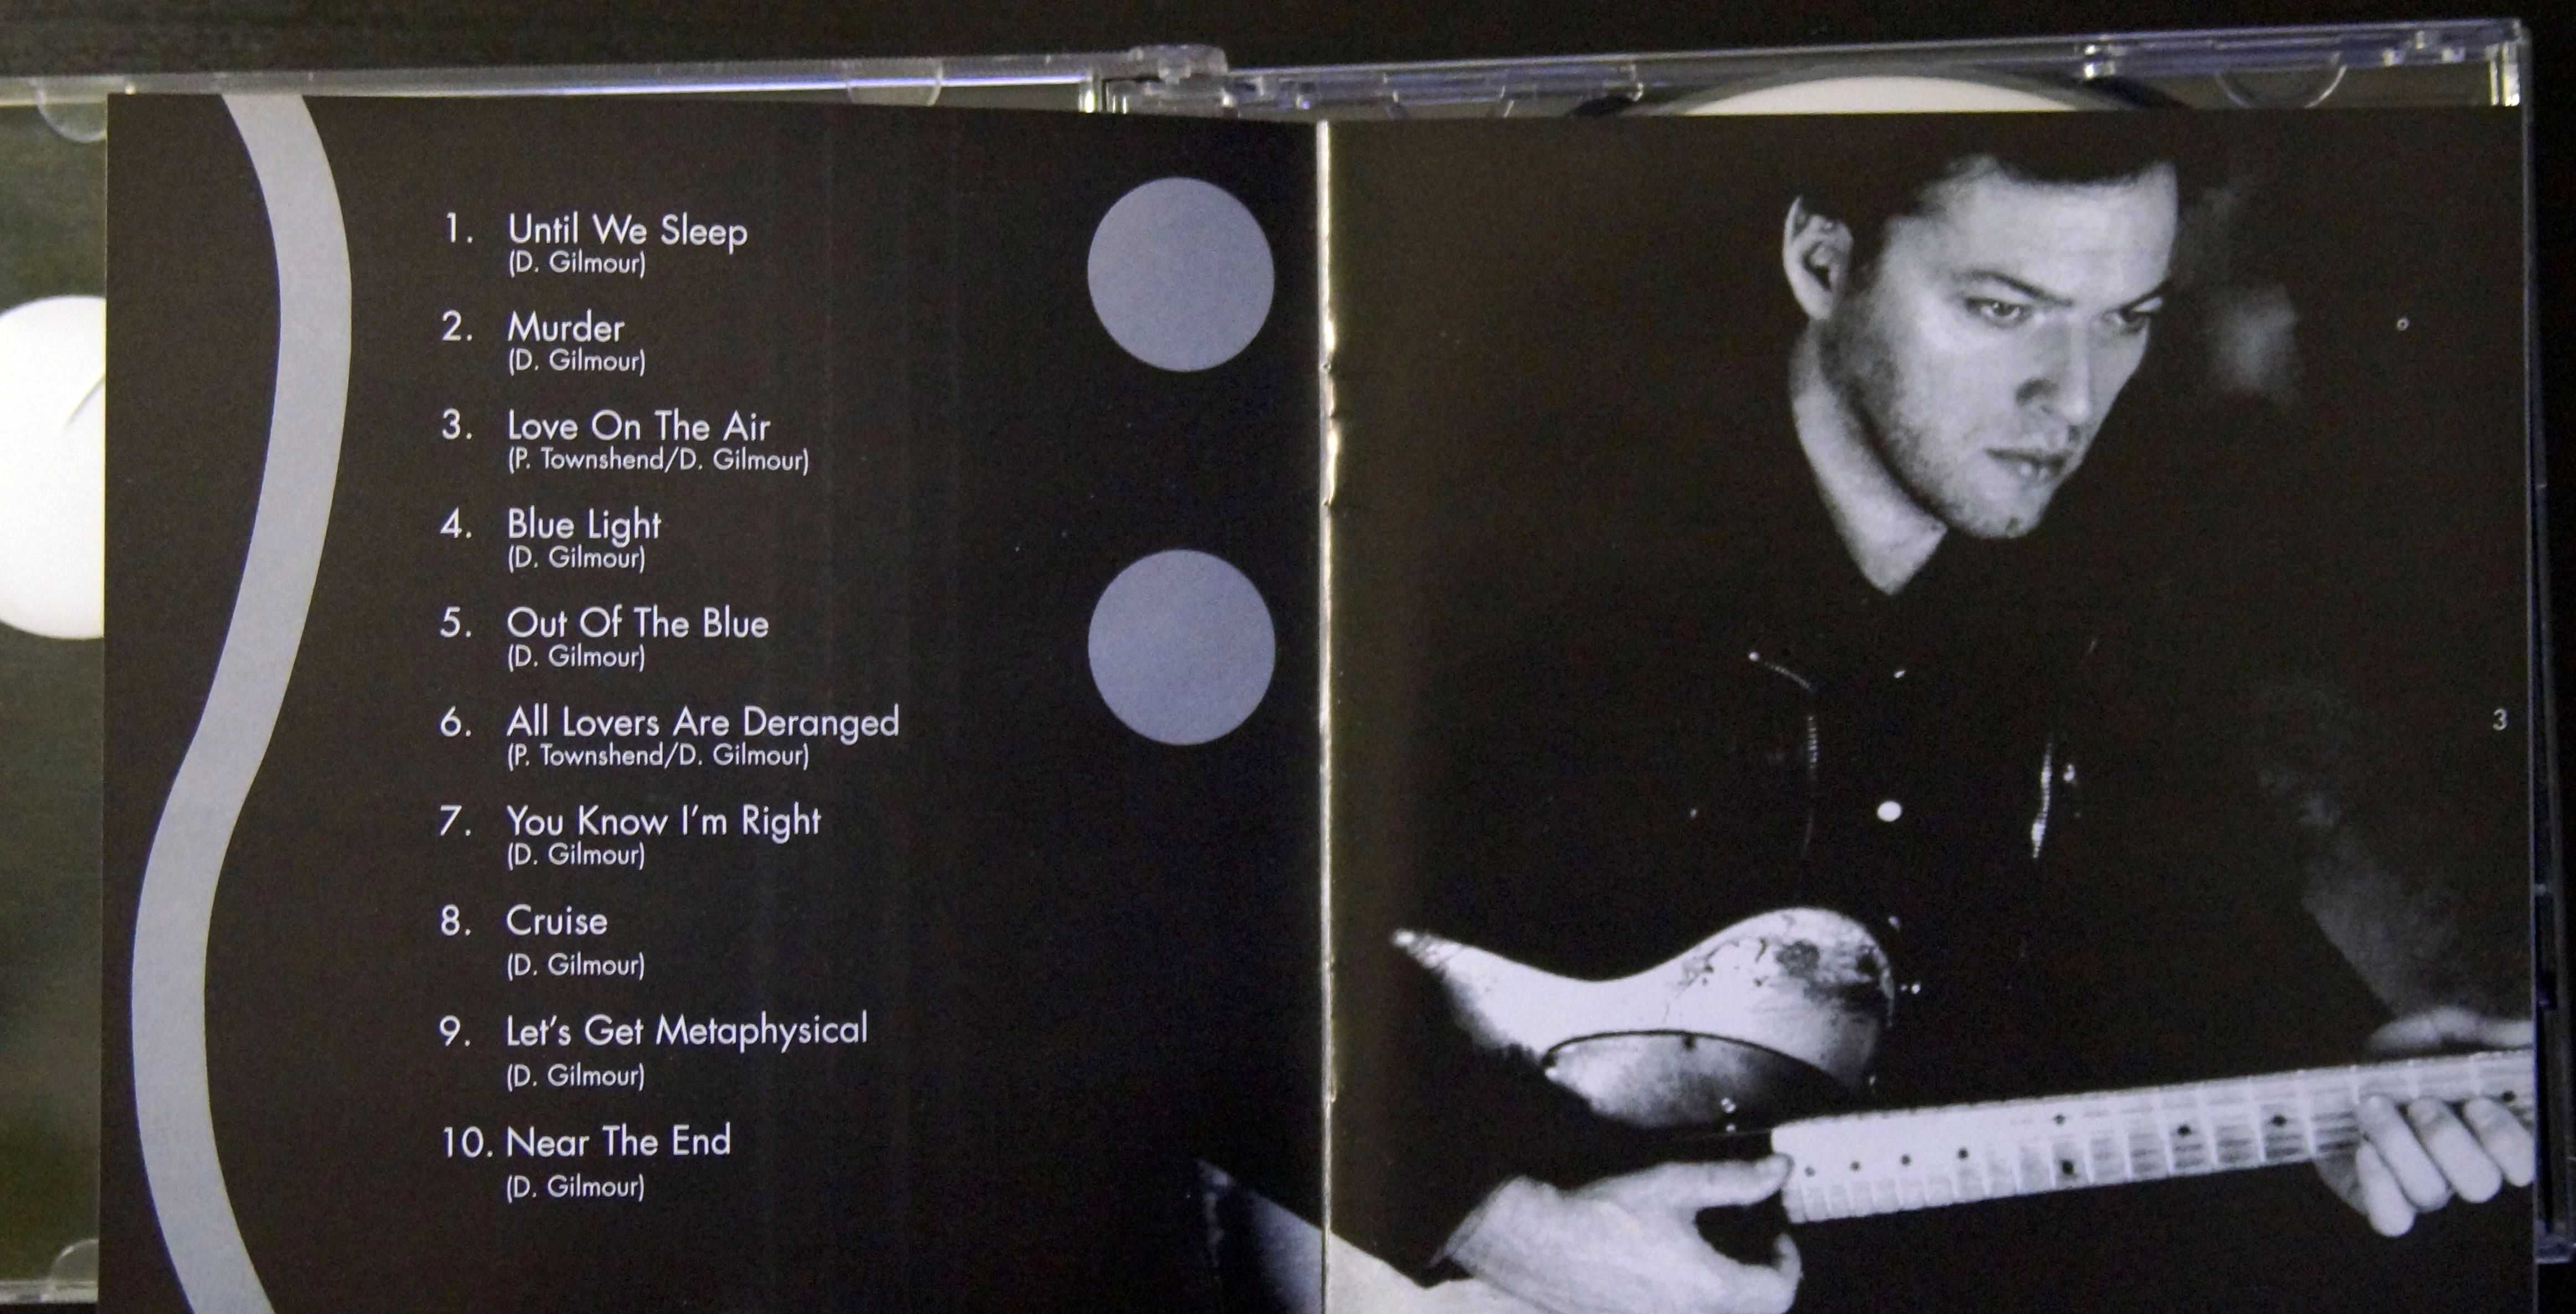 David Gilmour About Face CD